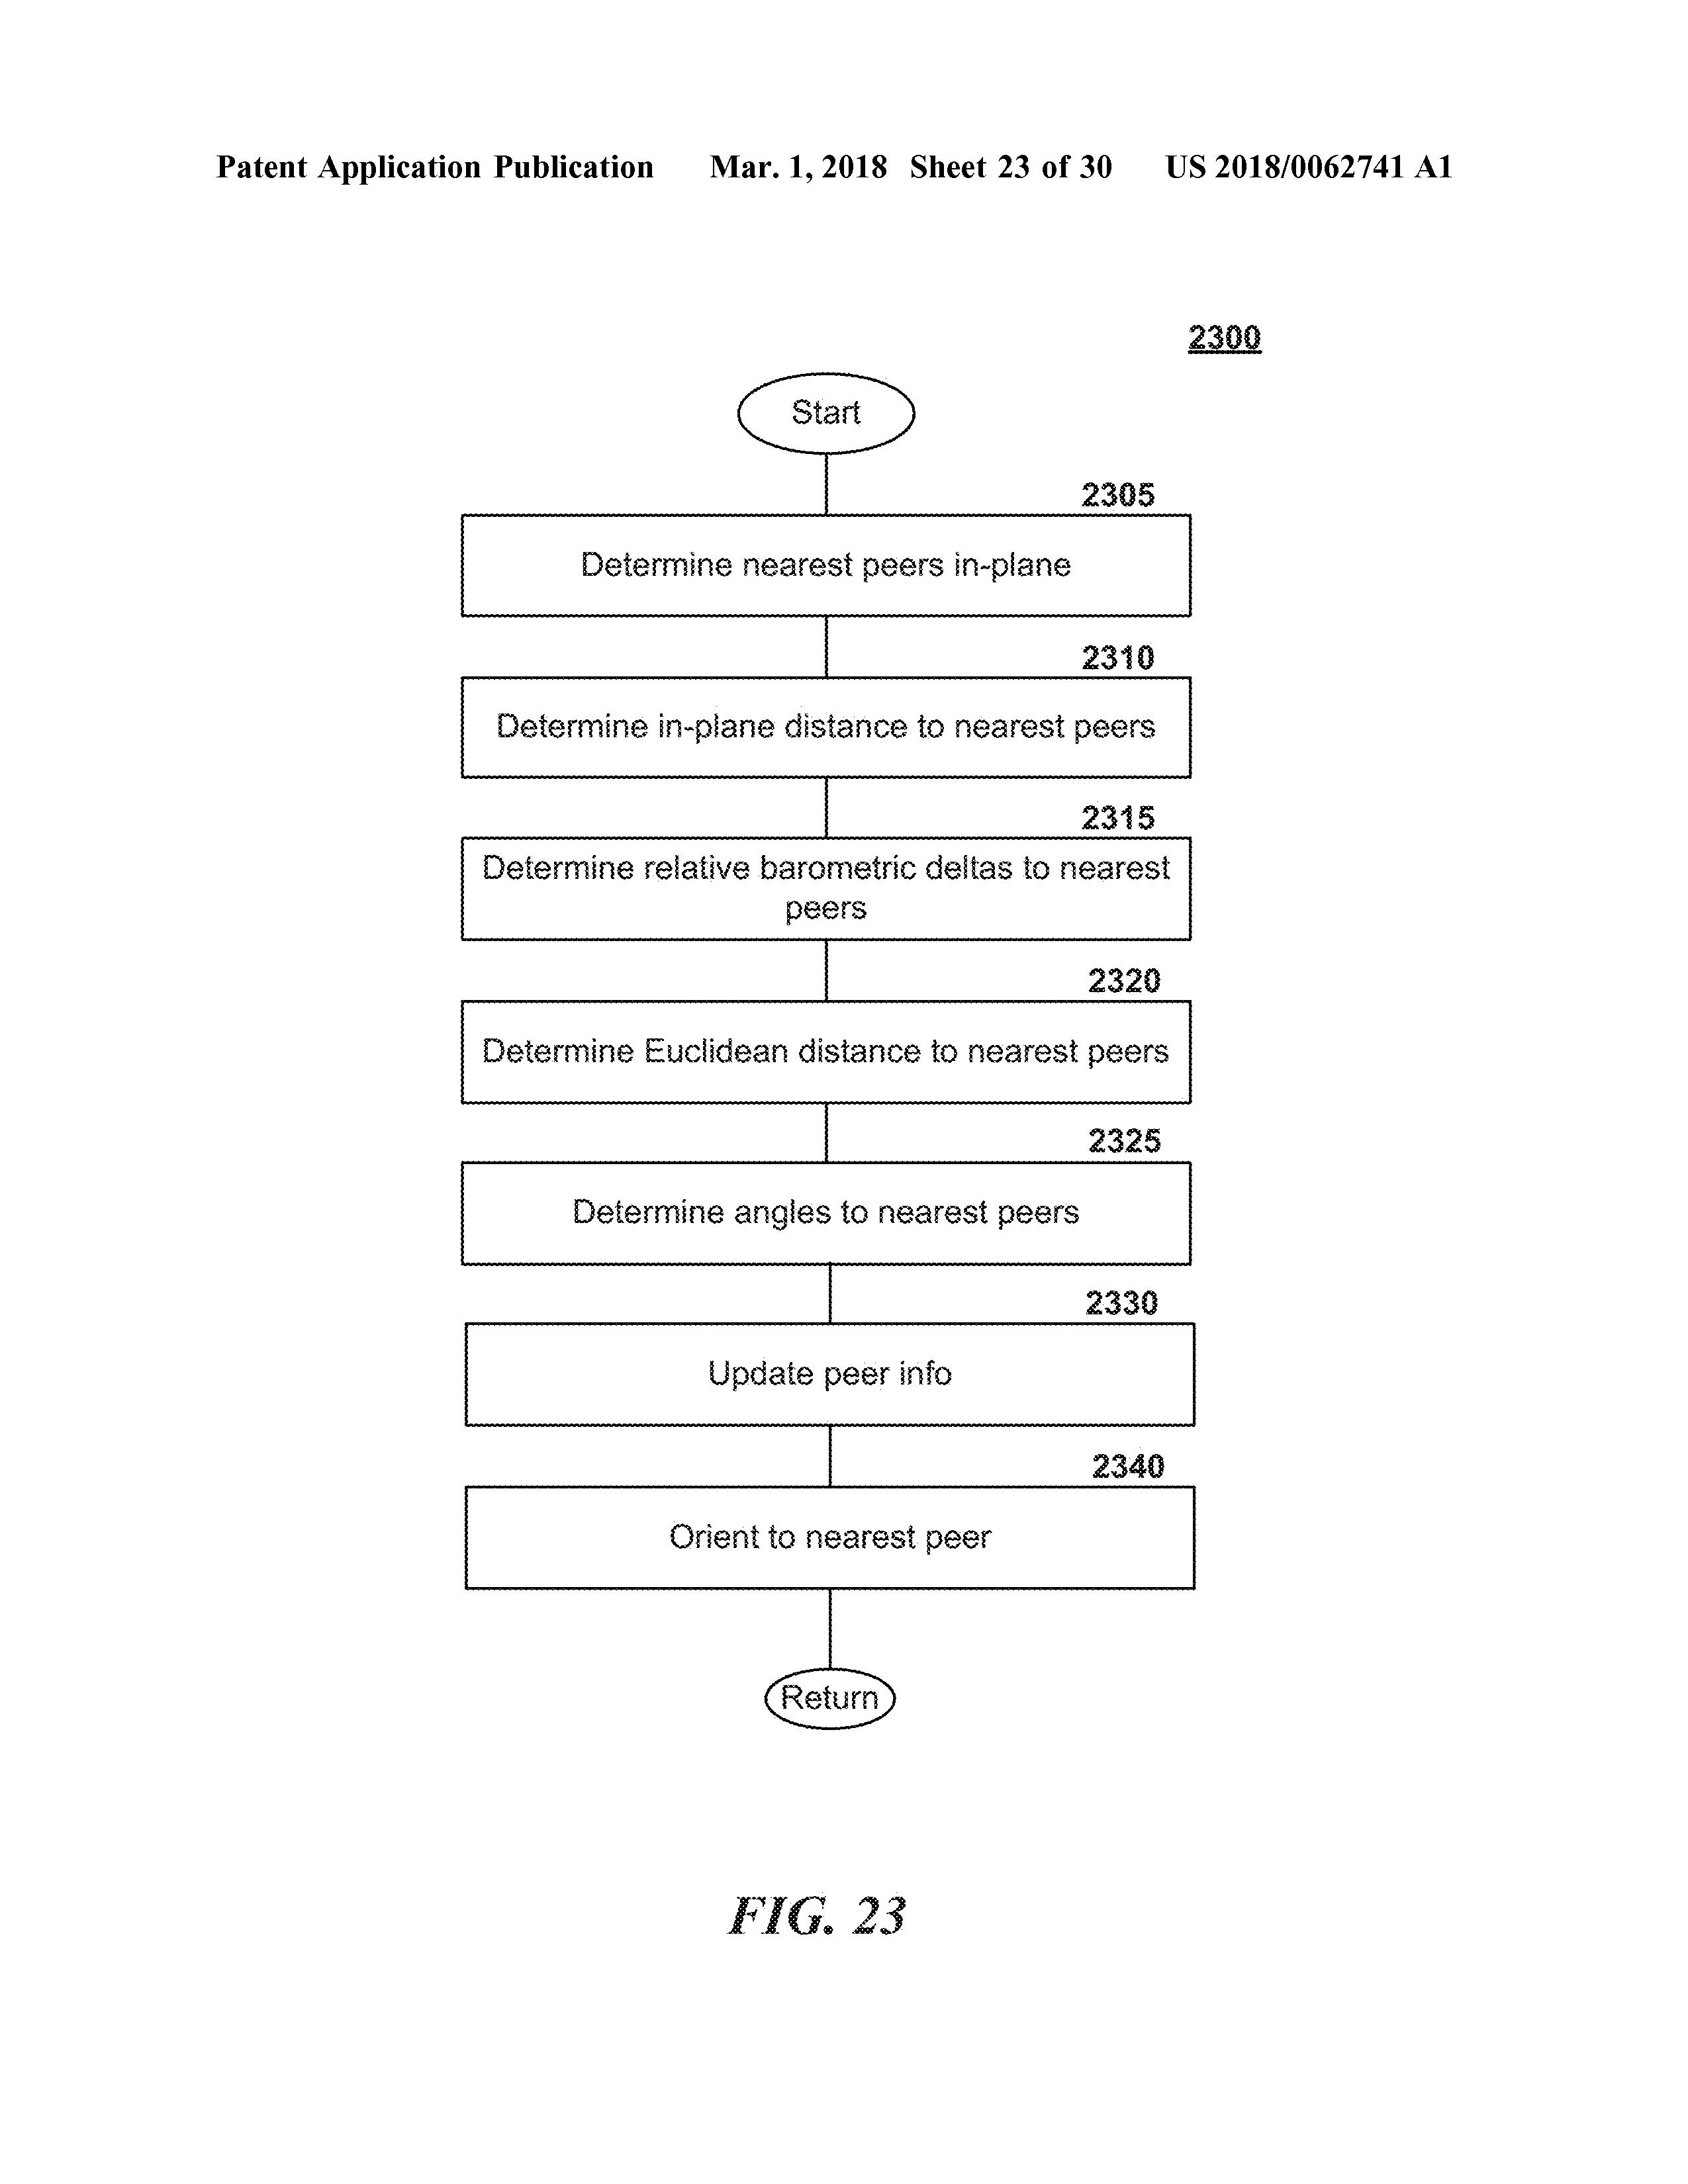 US20180062741A1 ALIGHNMENT IN LINE-OF-SIGHT COMMUNICATION NETWORKS